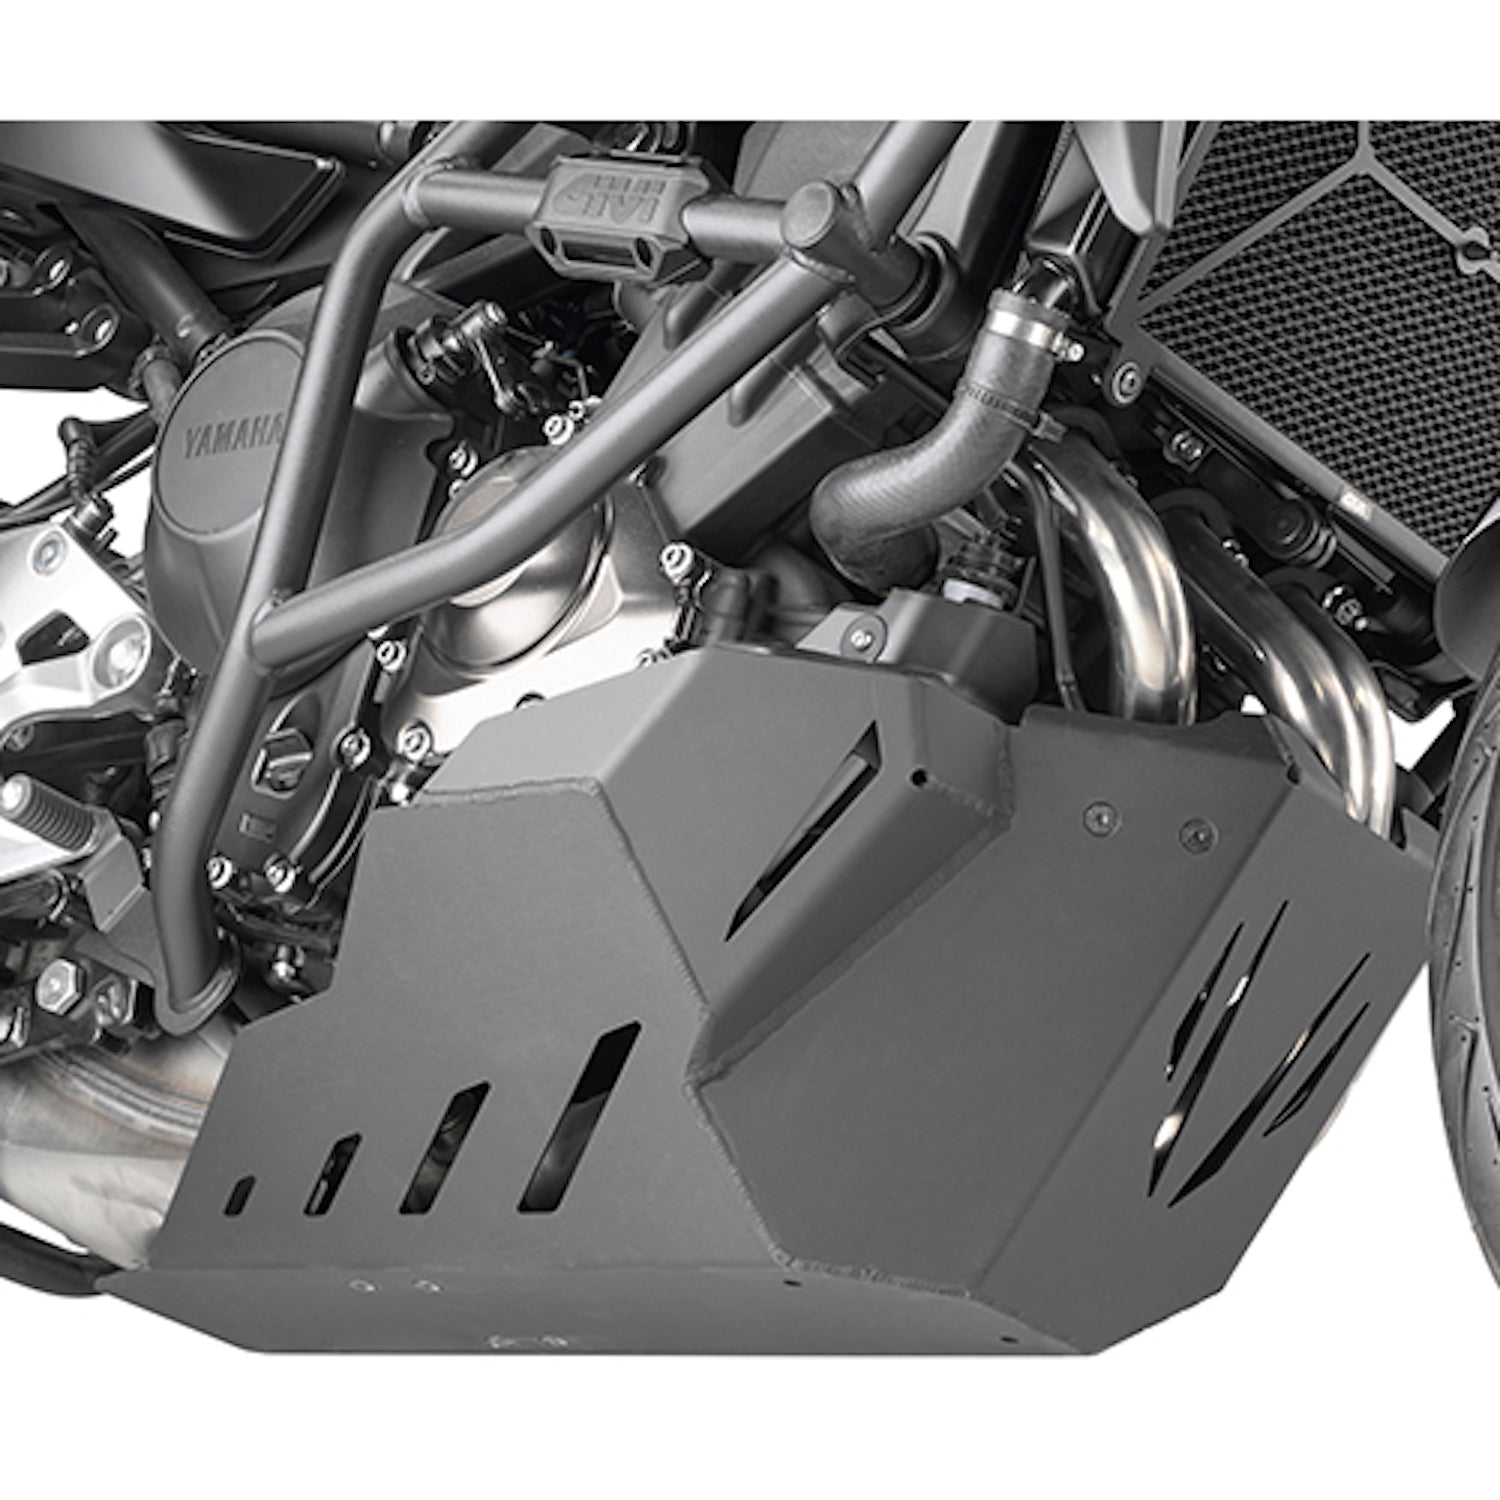 GIVI PARACOPPA RP2139 COMPATIBILE CON YAMAHA TRACER 900 GT 18/20